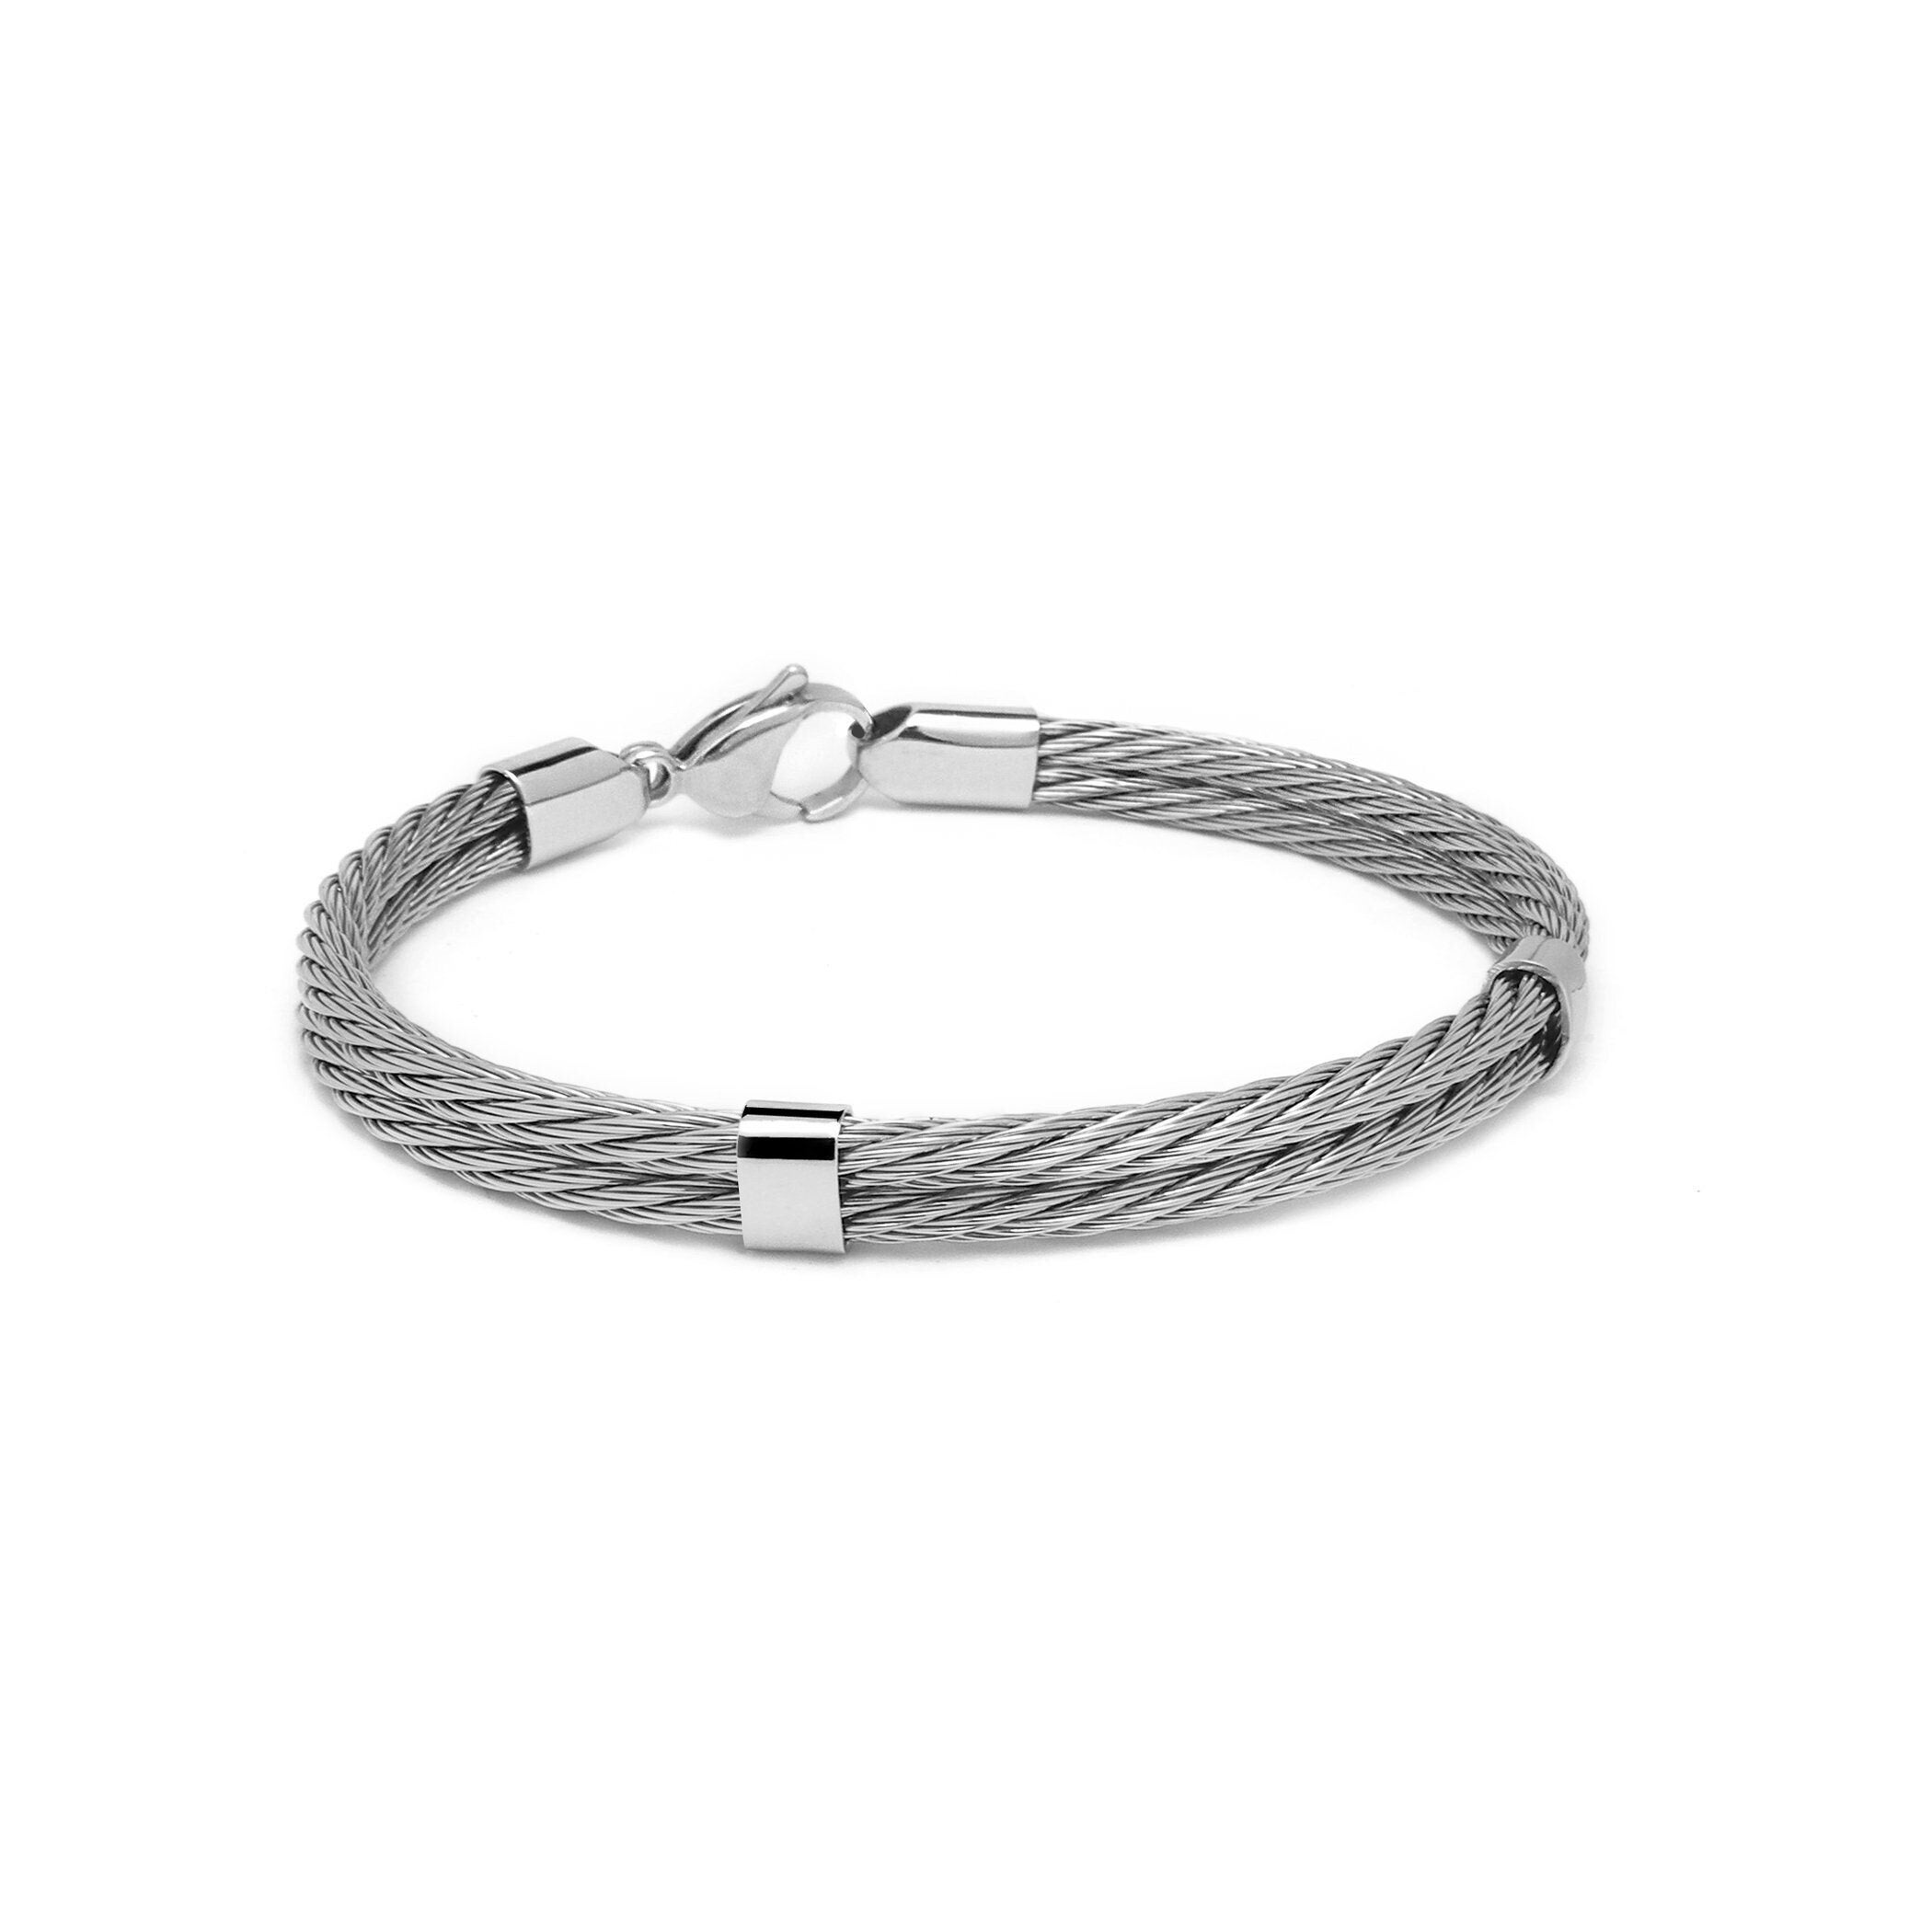 6mm width double row stainless steel cable rope bracelet by Taormina ...